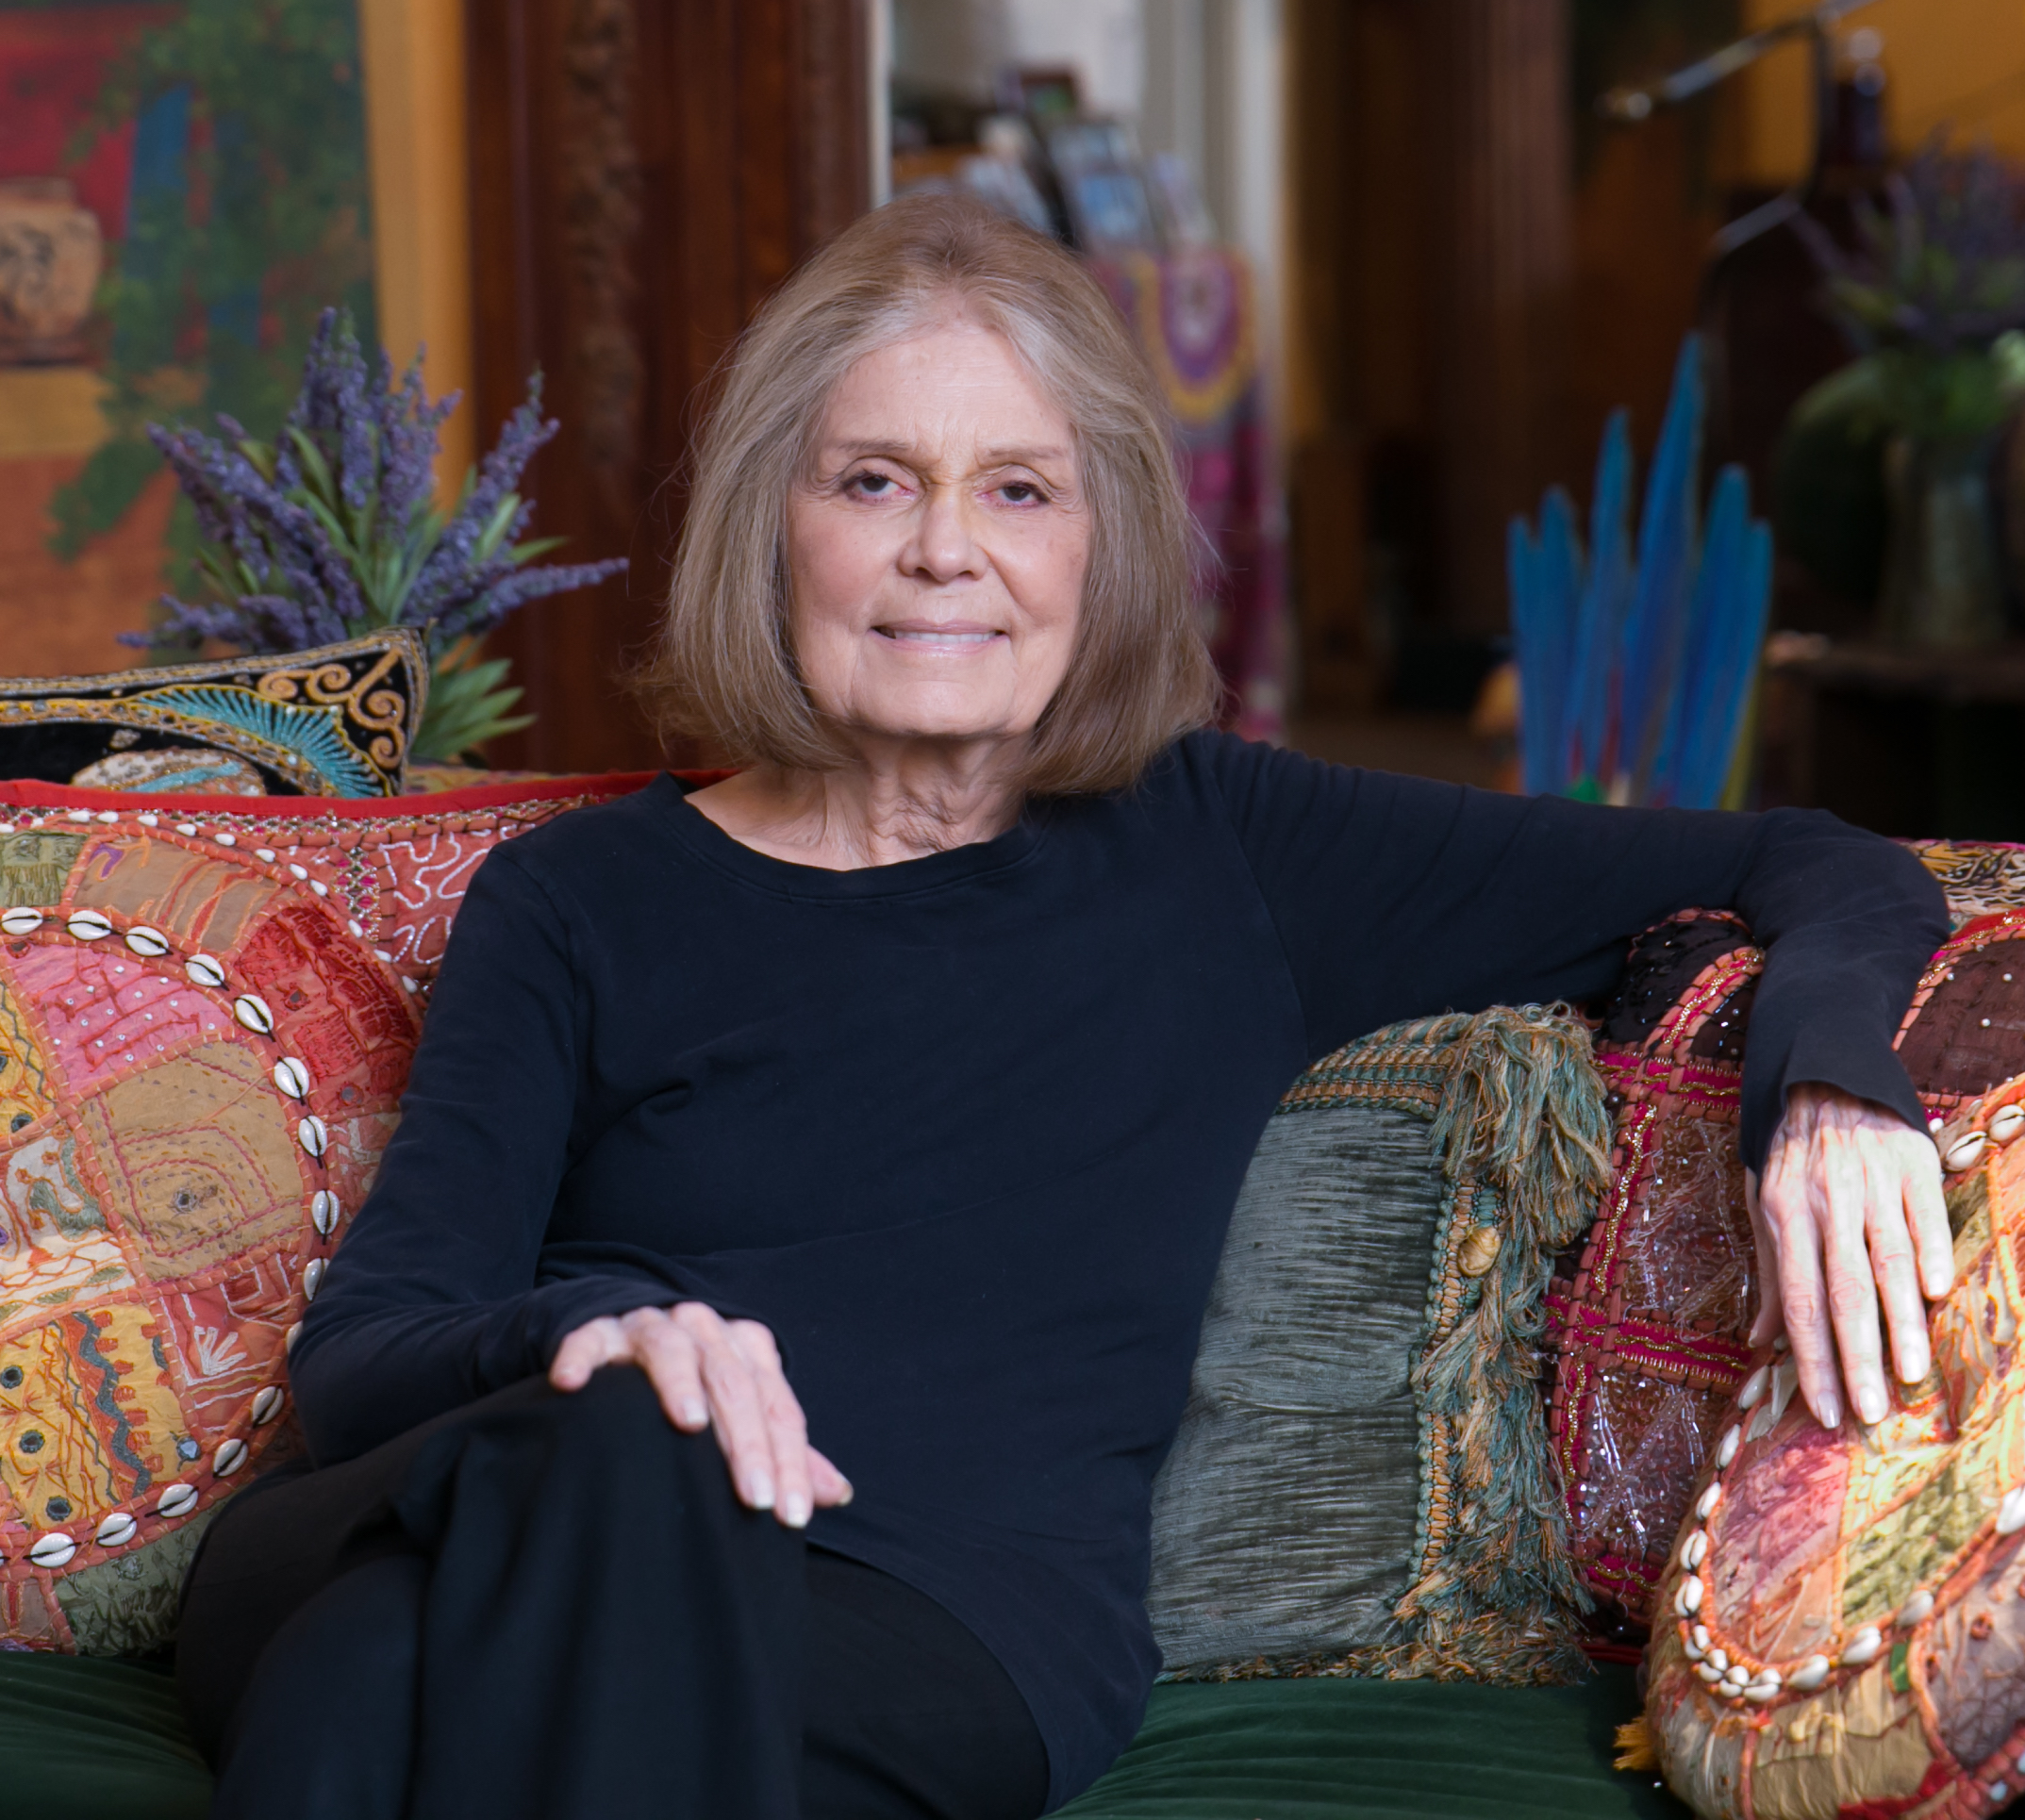 Gloria Steinem, a white woman with dark blonde and grey hair wearing a black shirt and black pants seated on a colorful chair.